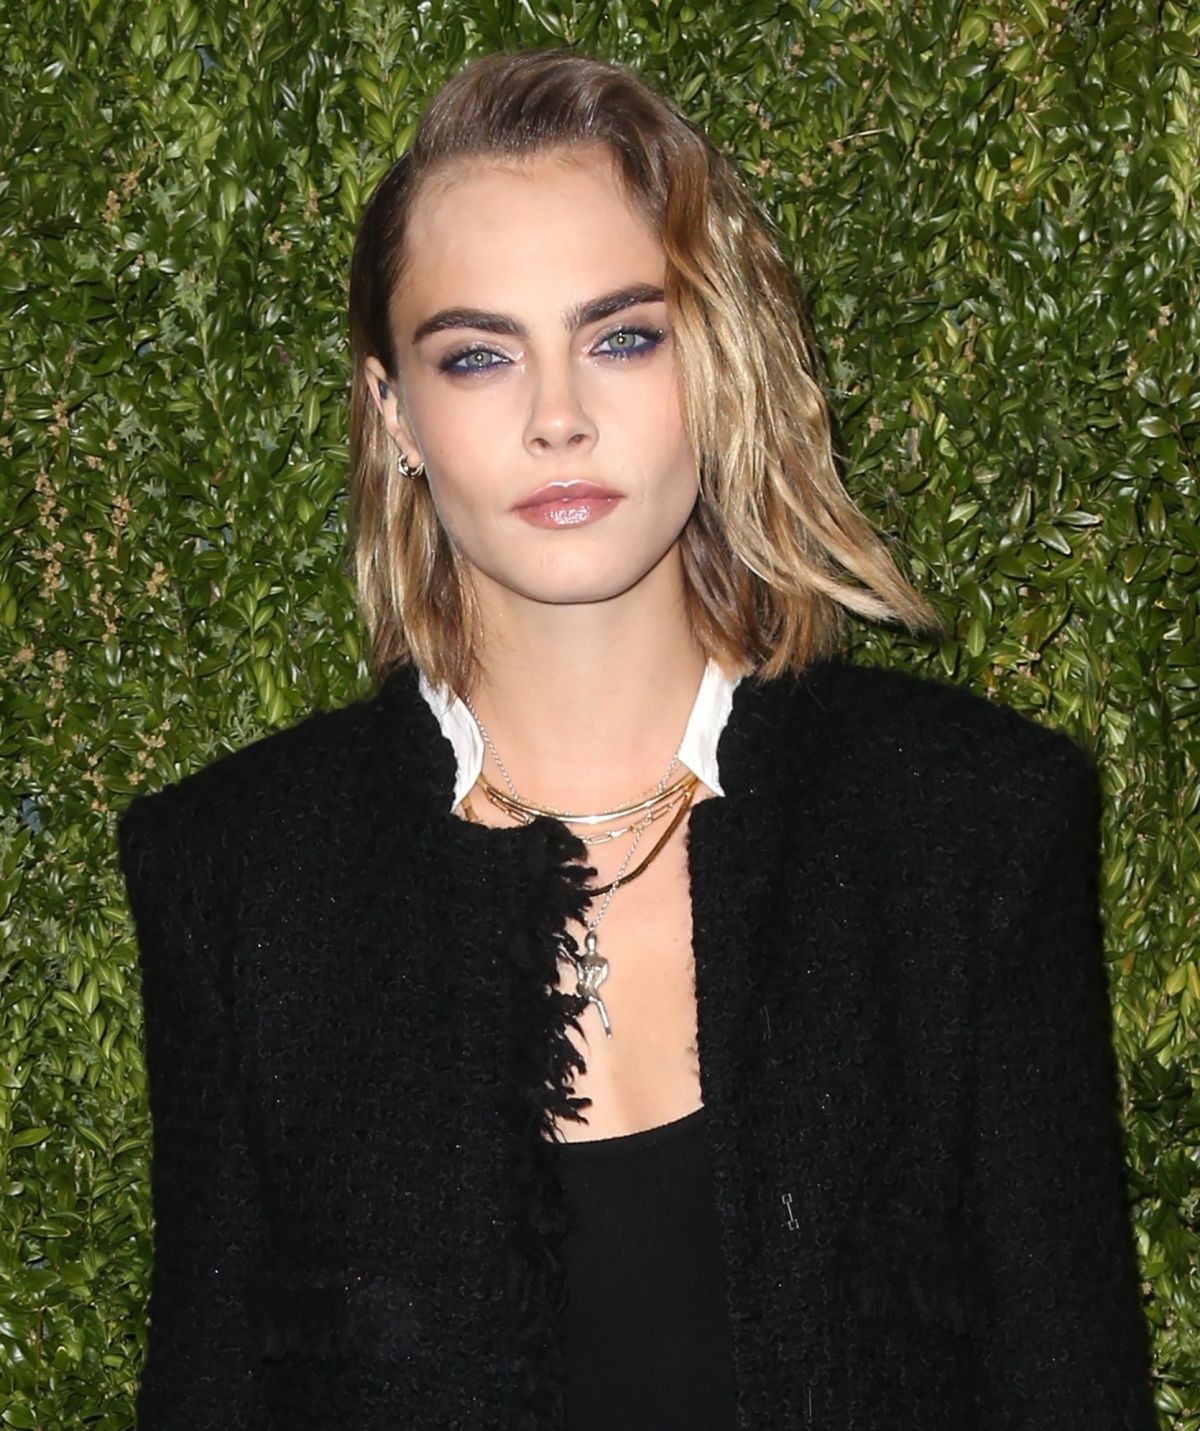 cara-delevingne-at-14th-annual-tribeca-film-festival-artists-dinner-hosted-by-chanel-04-29-2019-2.jpg